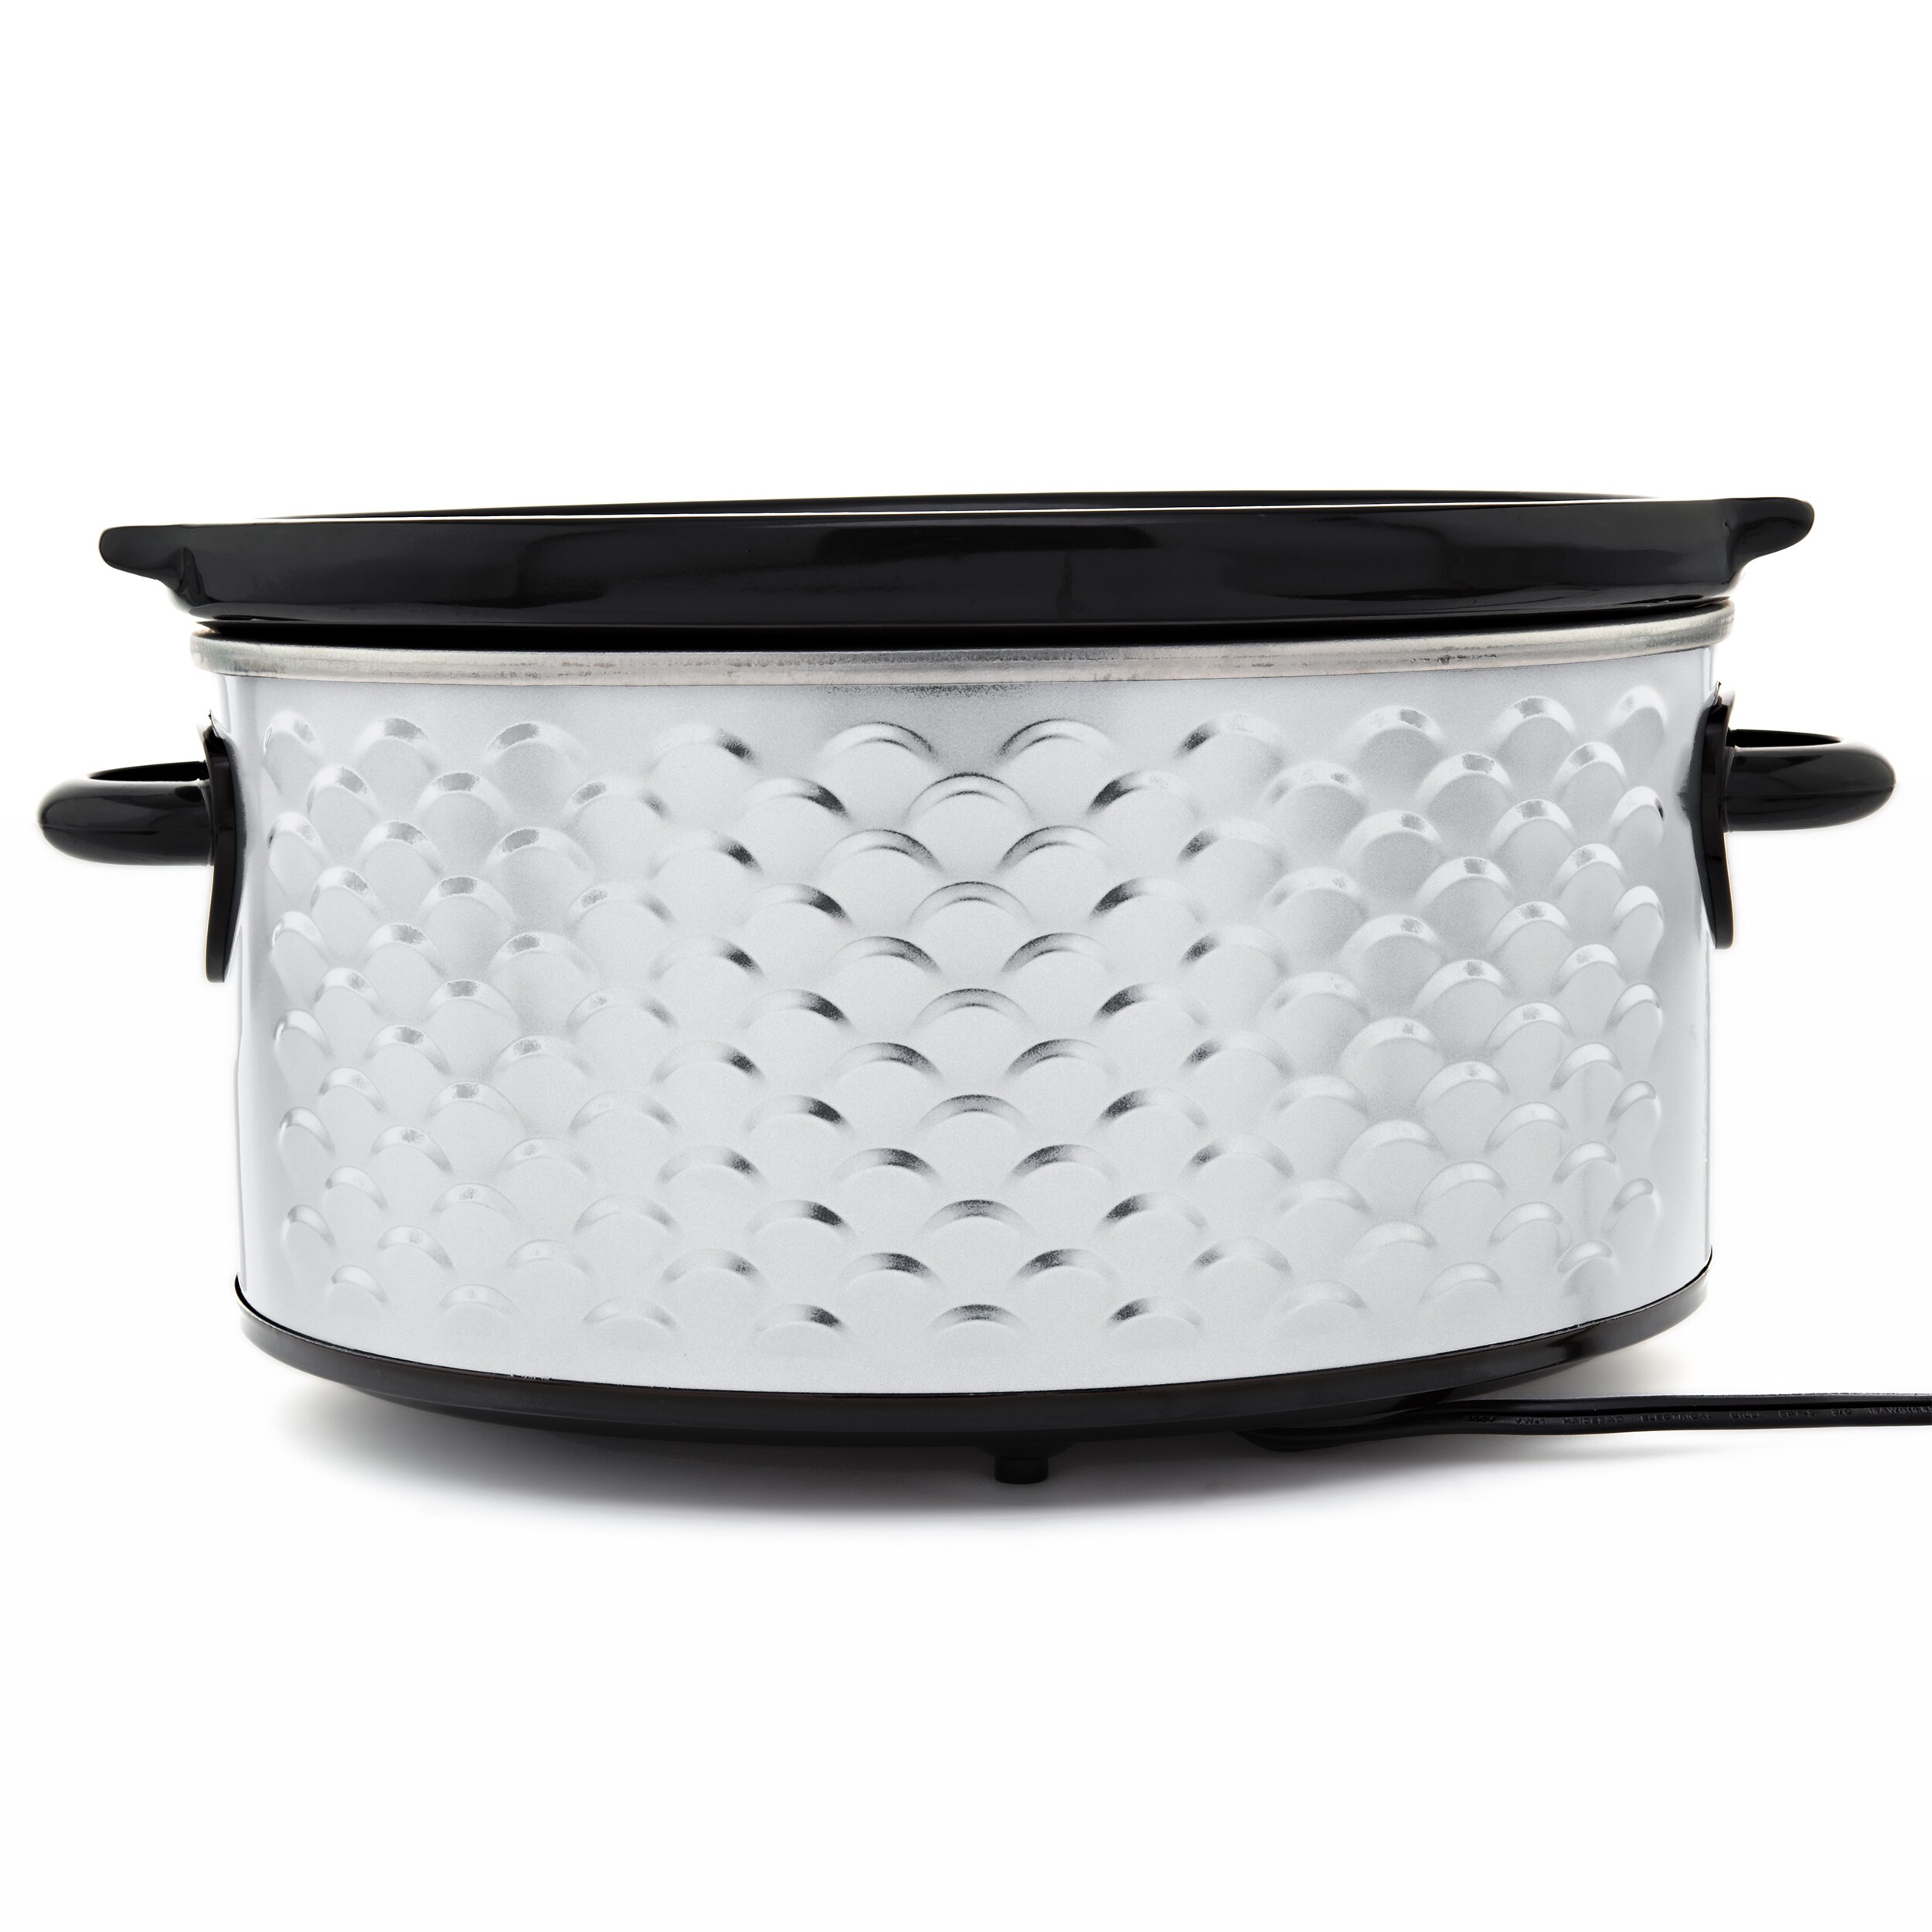 Brentwood Scallop Pattern 4.5 qt. Stainless Steel Slow Cooker